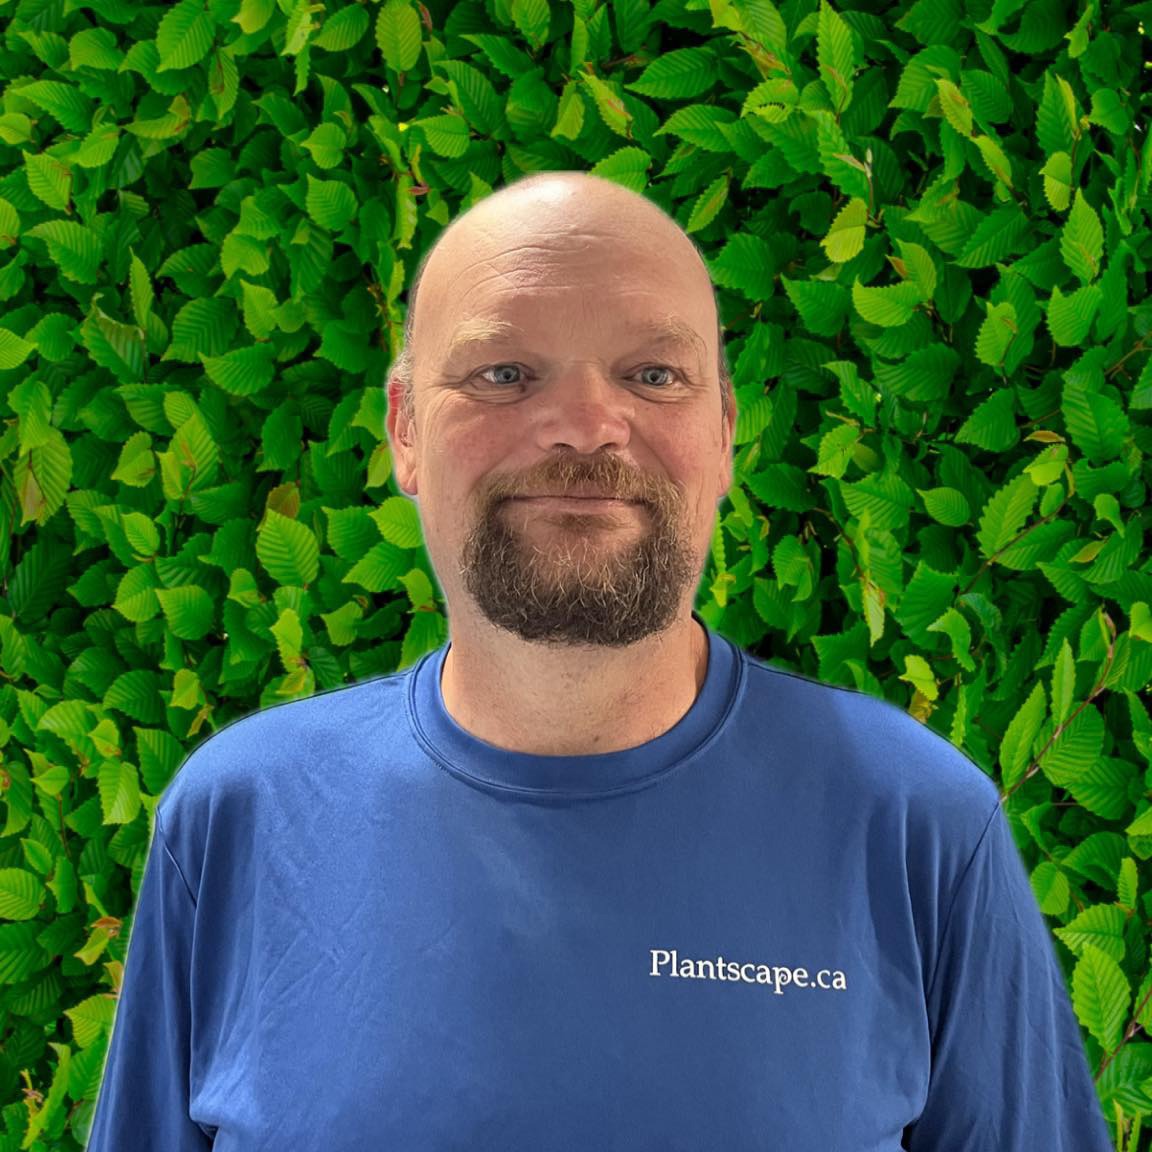 A person with a beard is smiling in front of a lush green leafy background, wearing a blue shirt with the text "Plantscape.ca" on it.